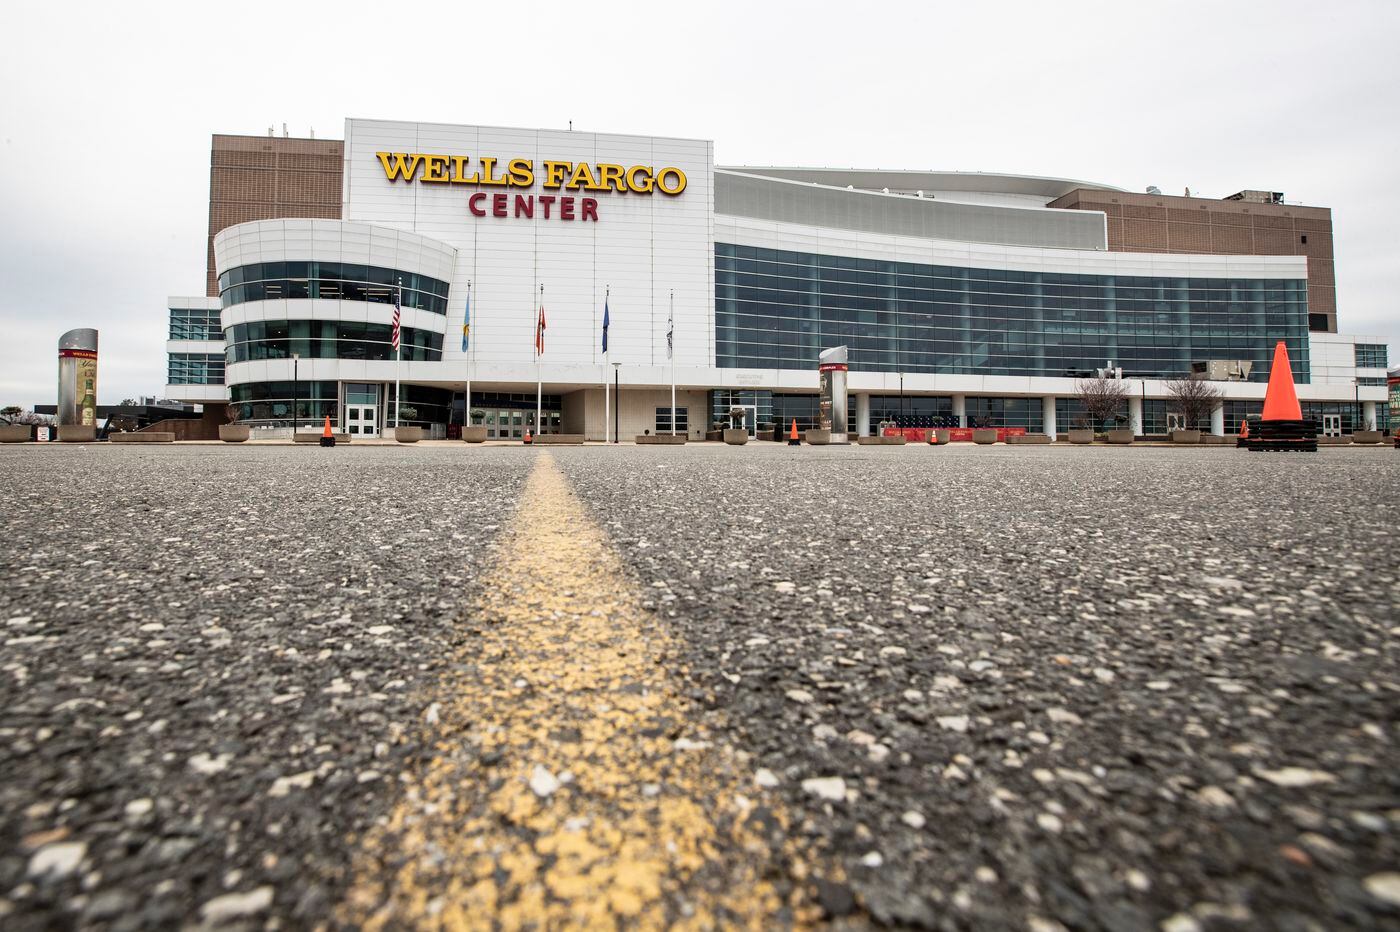 At the Wells Fargo Center, closed by coronavirus, Comcast workers will